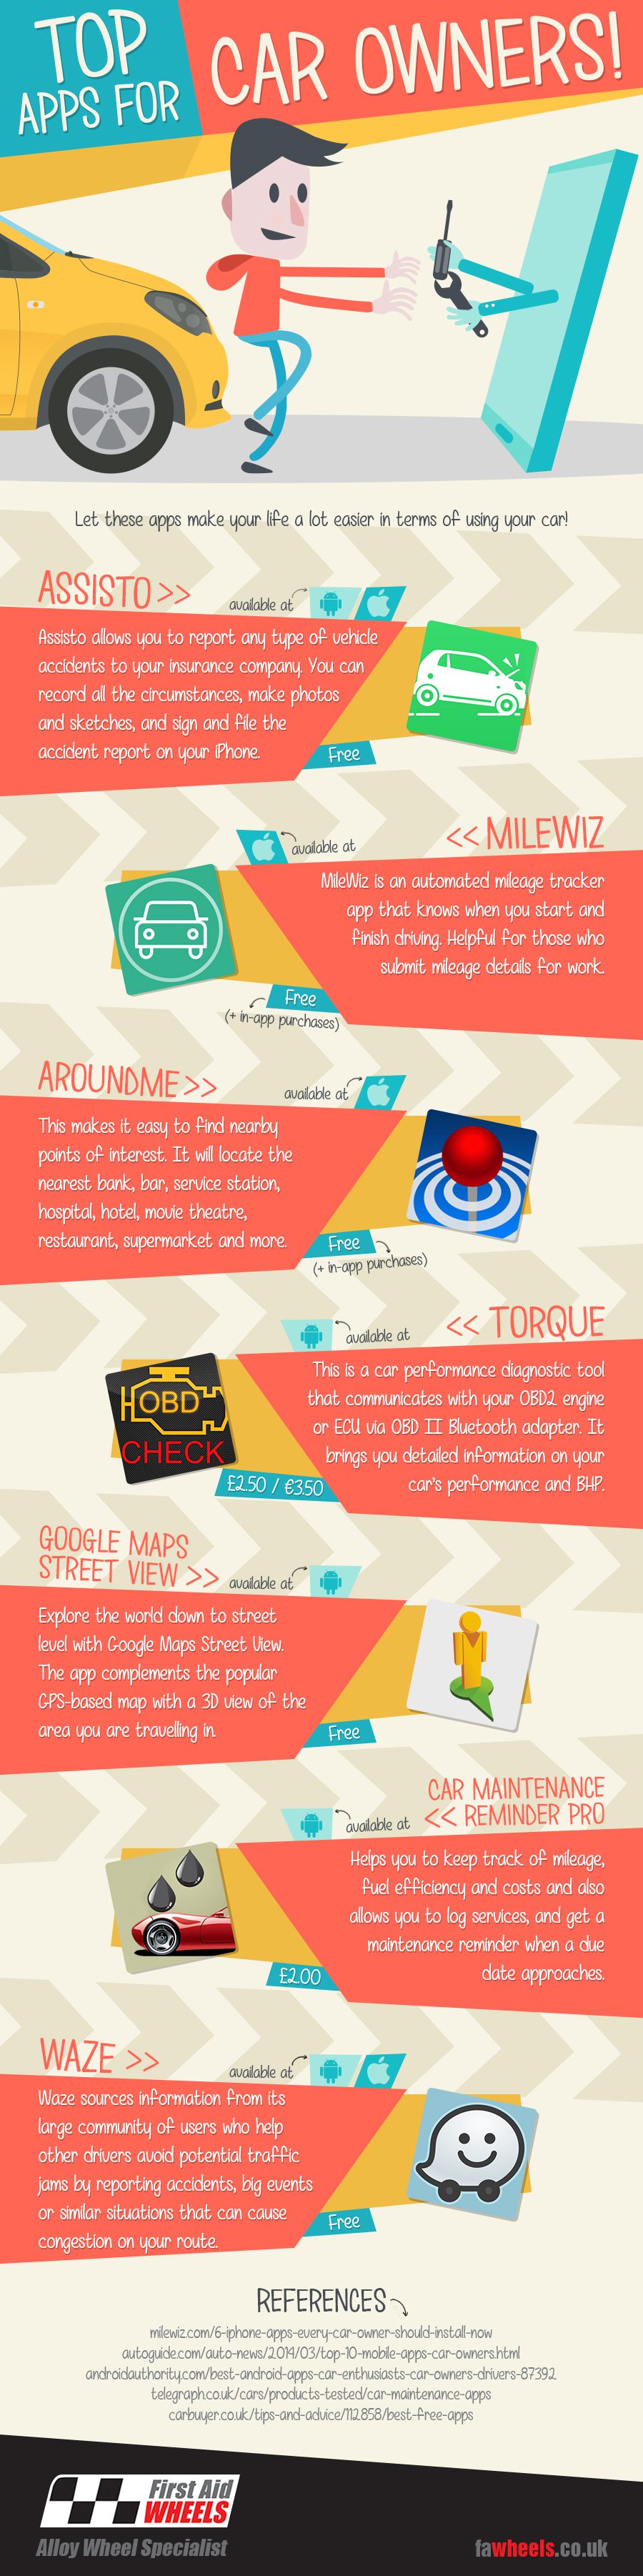 Best Car Apps Infographic